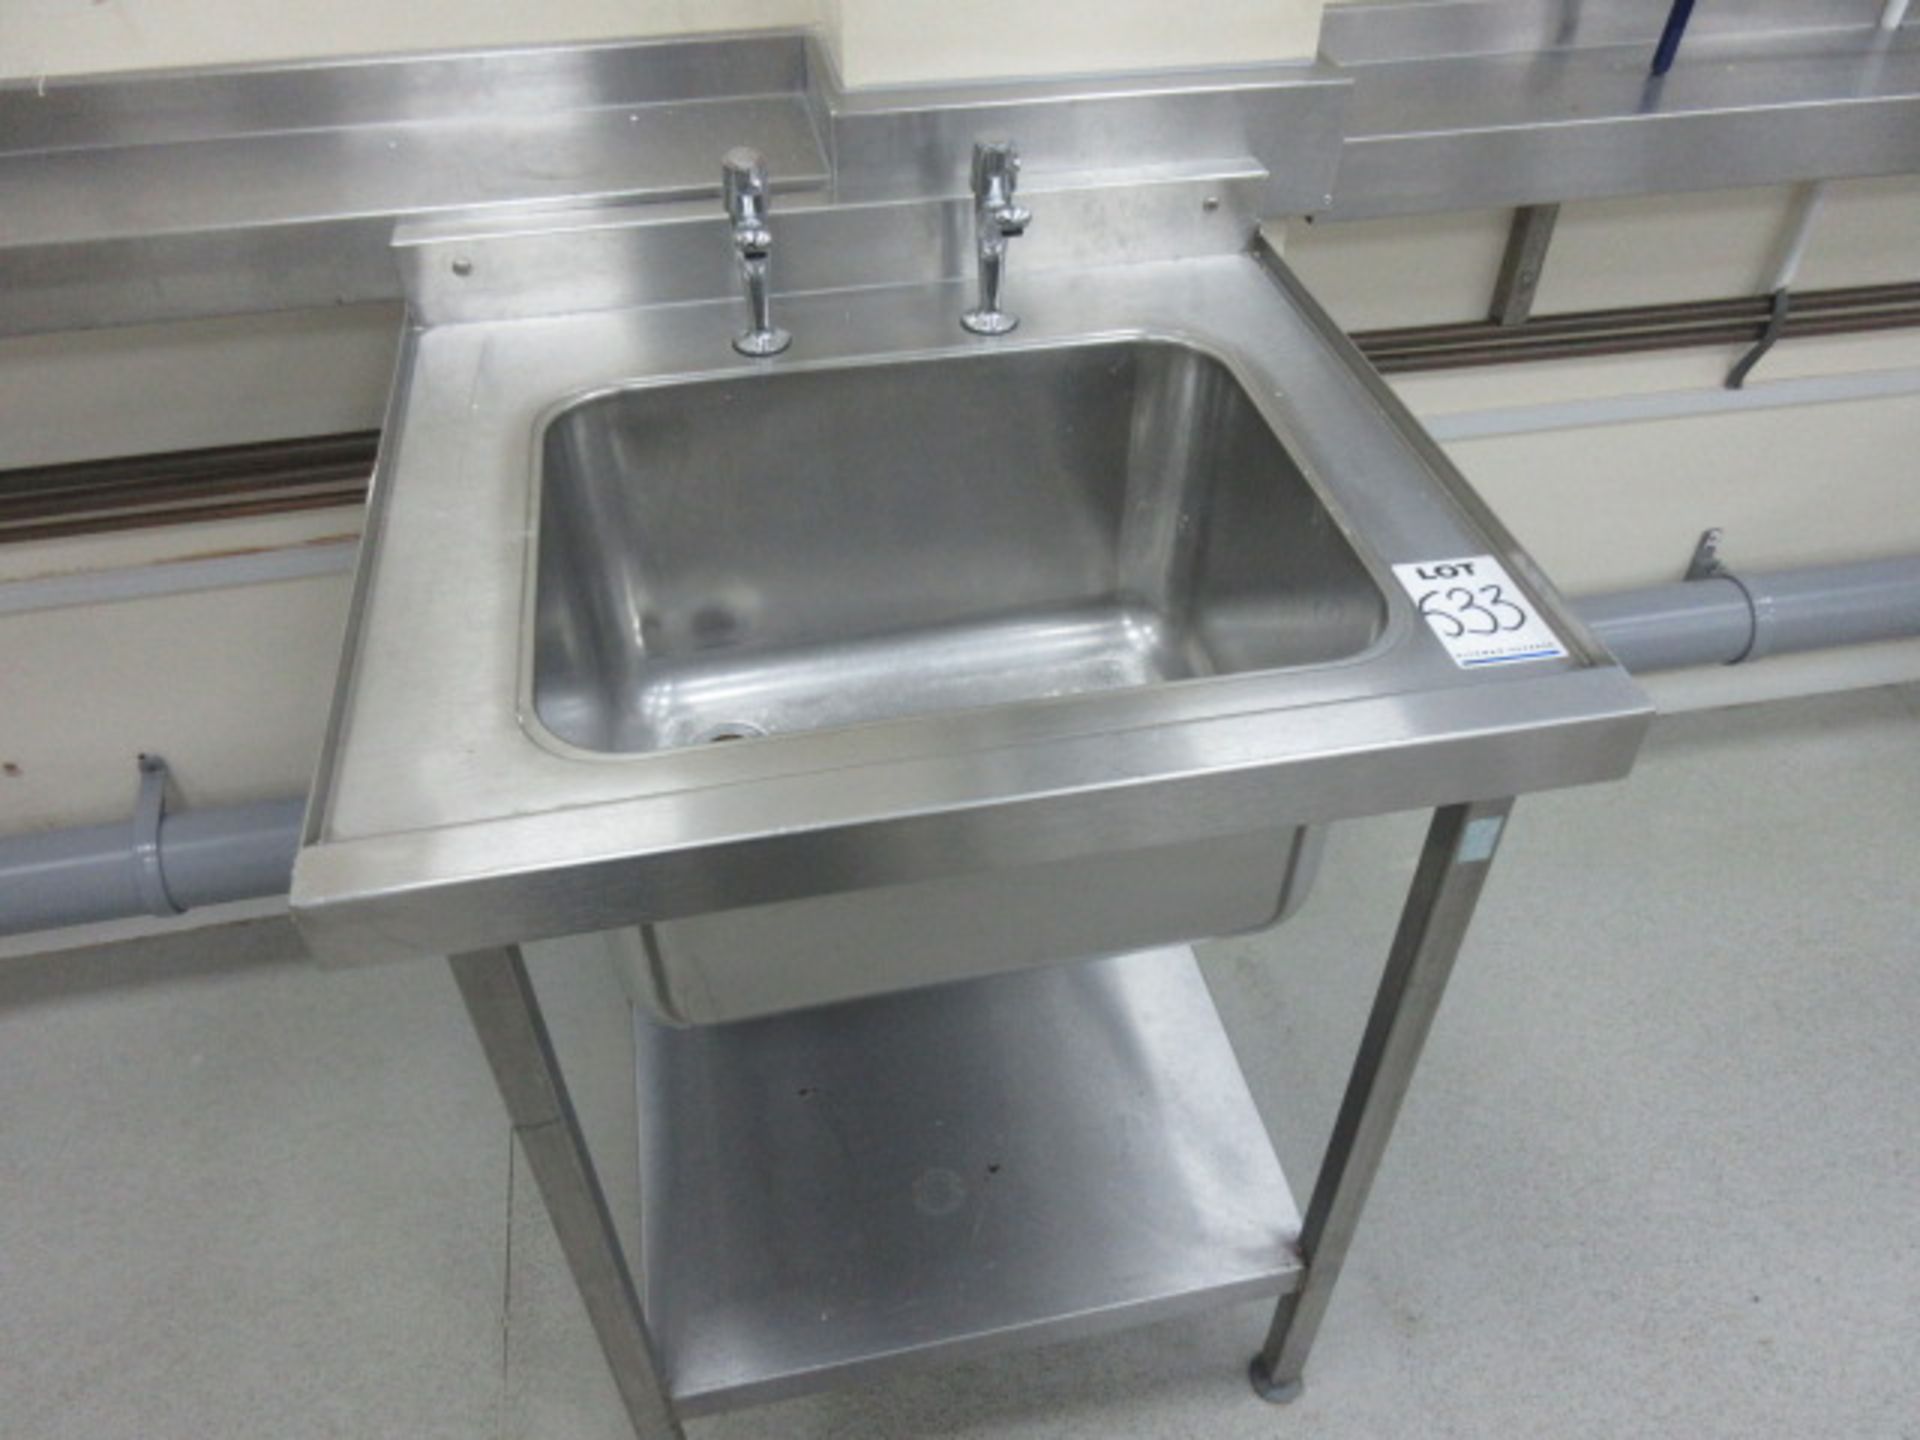 Stainless Steel Catering Sink Unit. Deep sink bowl size 500 x 400 x 300 mm deep Holehouse Road Grd